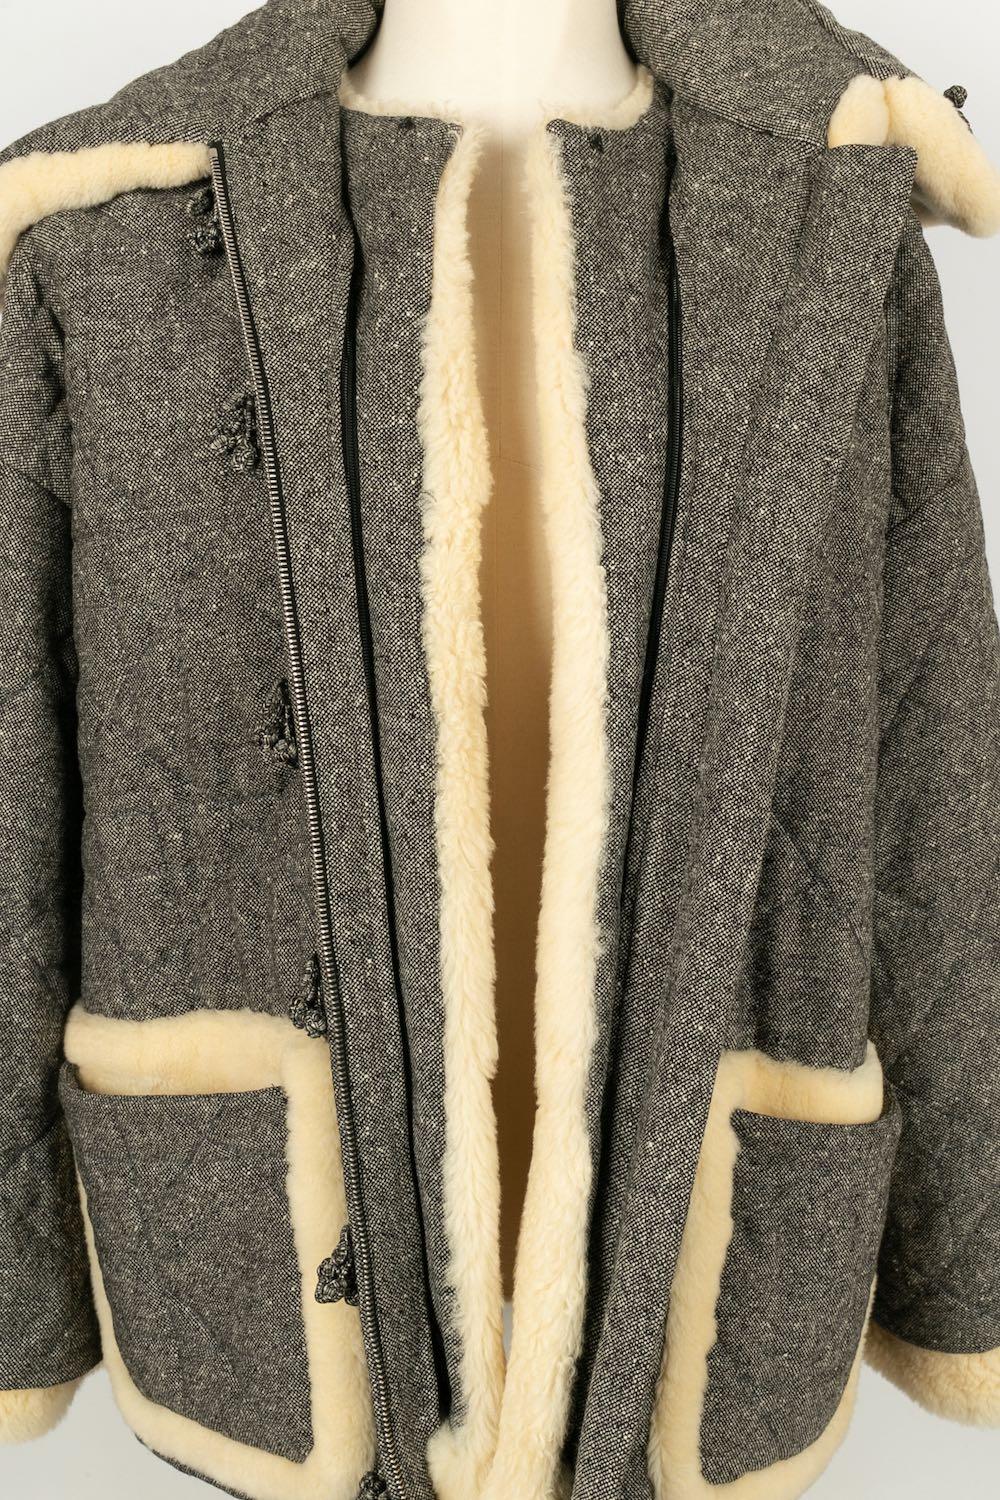 Christian Dior Grey Wool Coat, 2008 For Sale 4